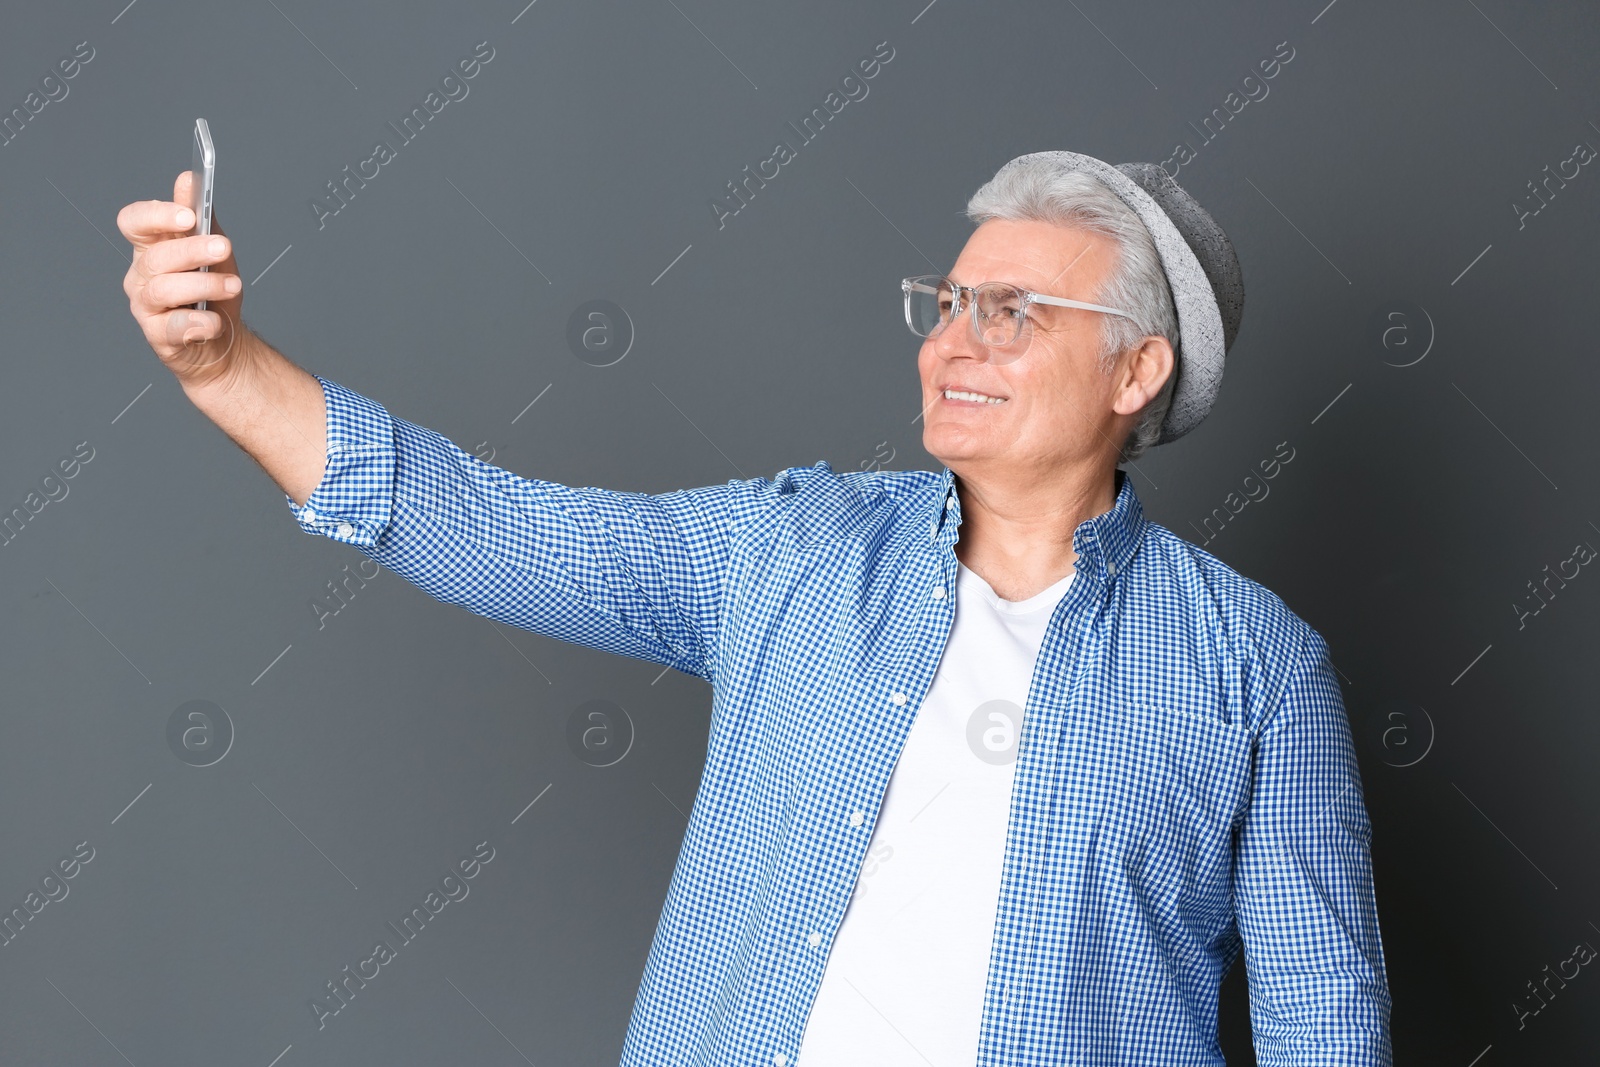 Photo of Mature man taking selfie against grey background